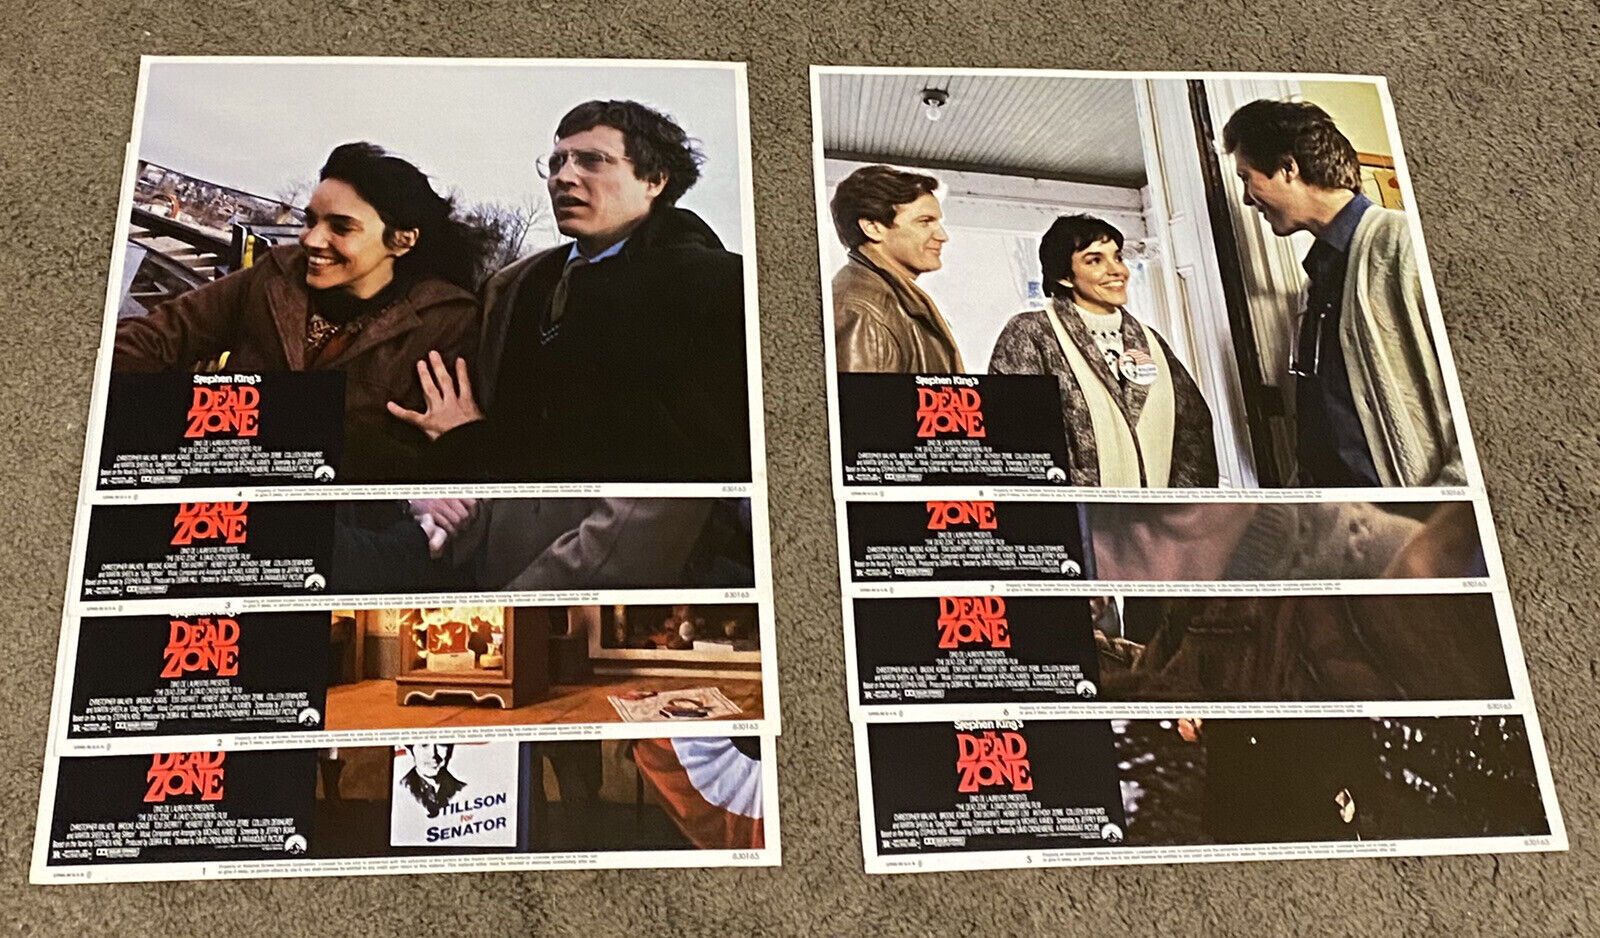 The Dead Zone Orig 8x10 Lobby Card Posters Stephen King Set Of 8-1,2,3,4,5,6,7,8